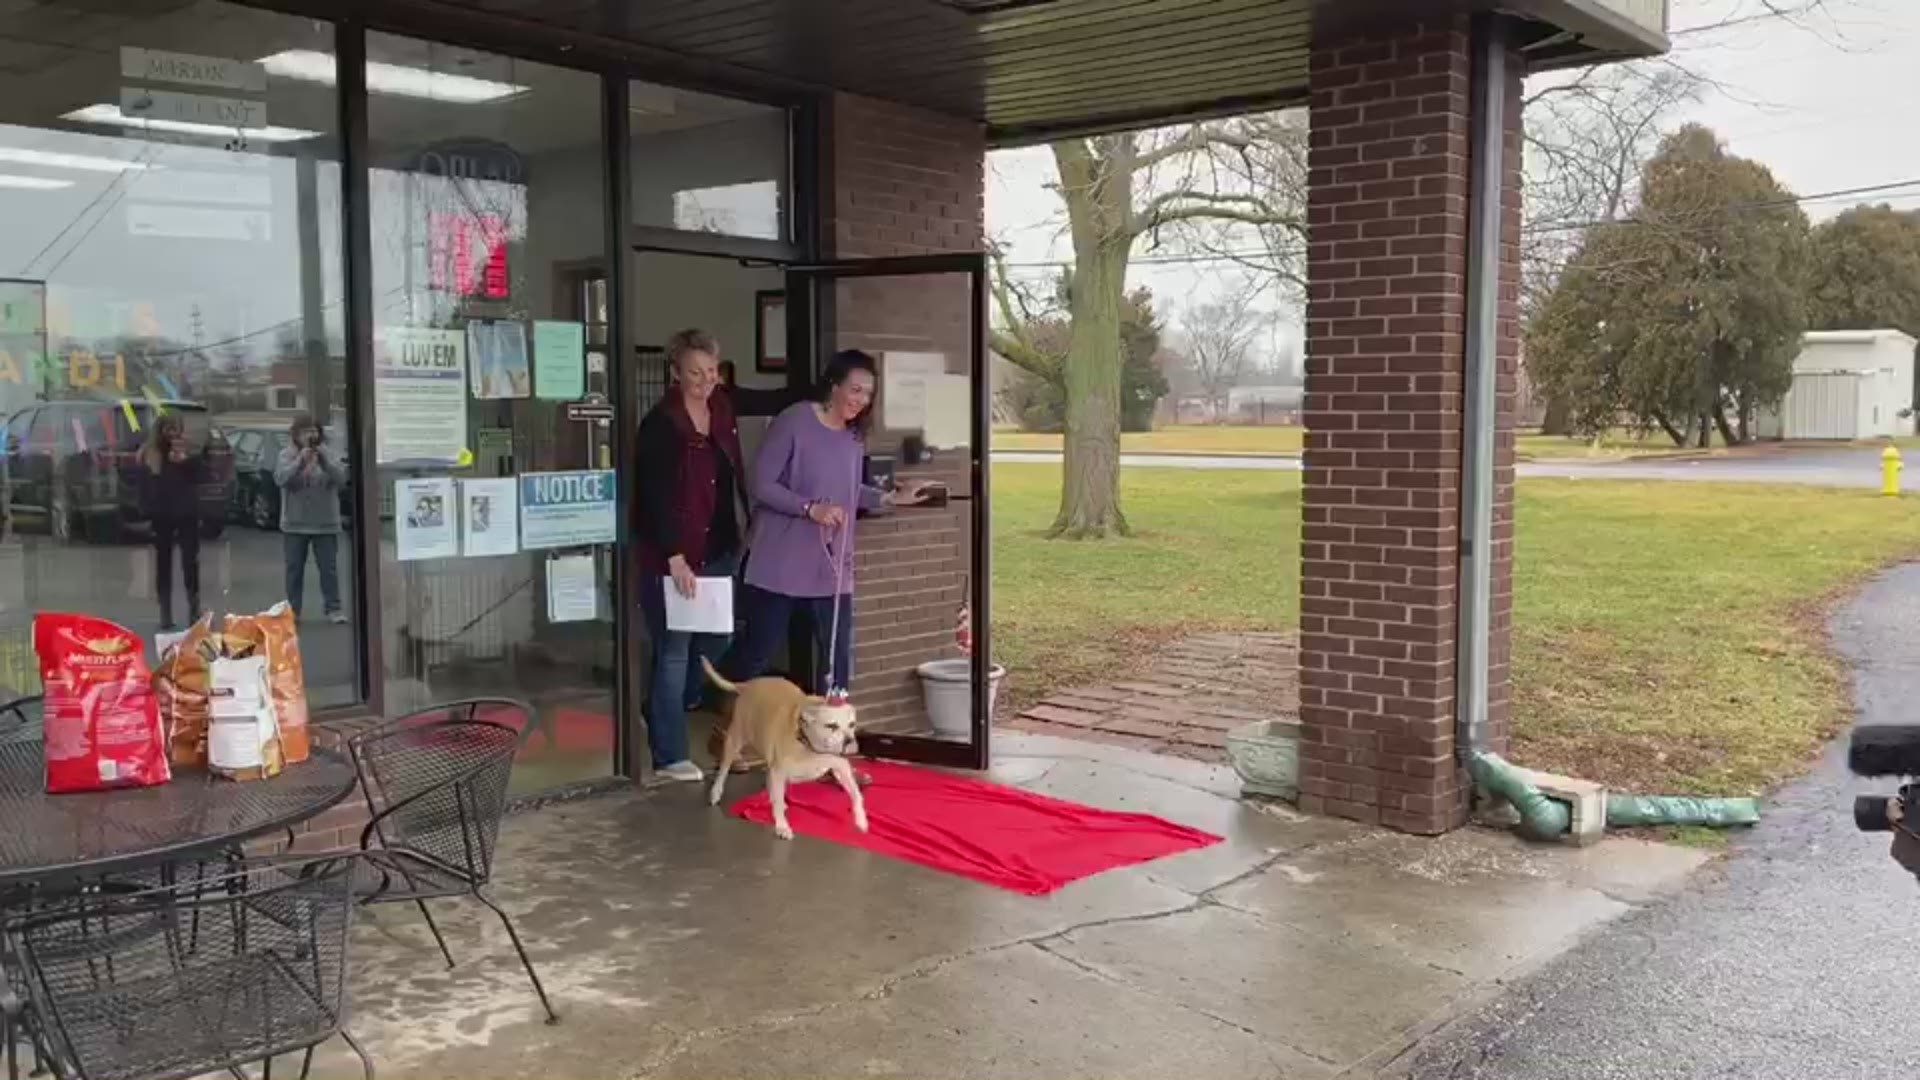 Video provided by Marion-Grant County Humane Society